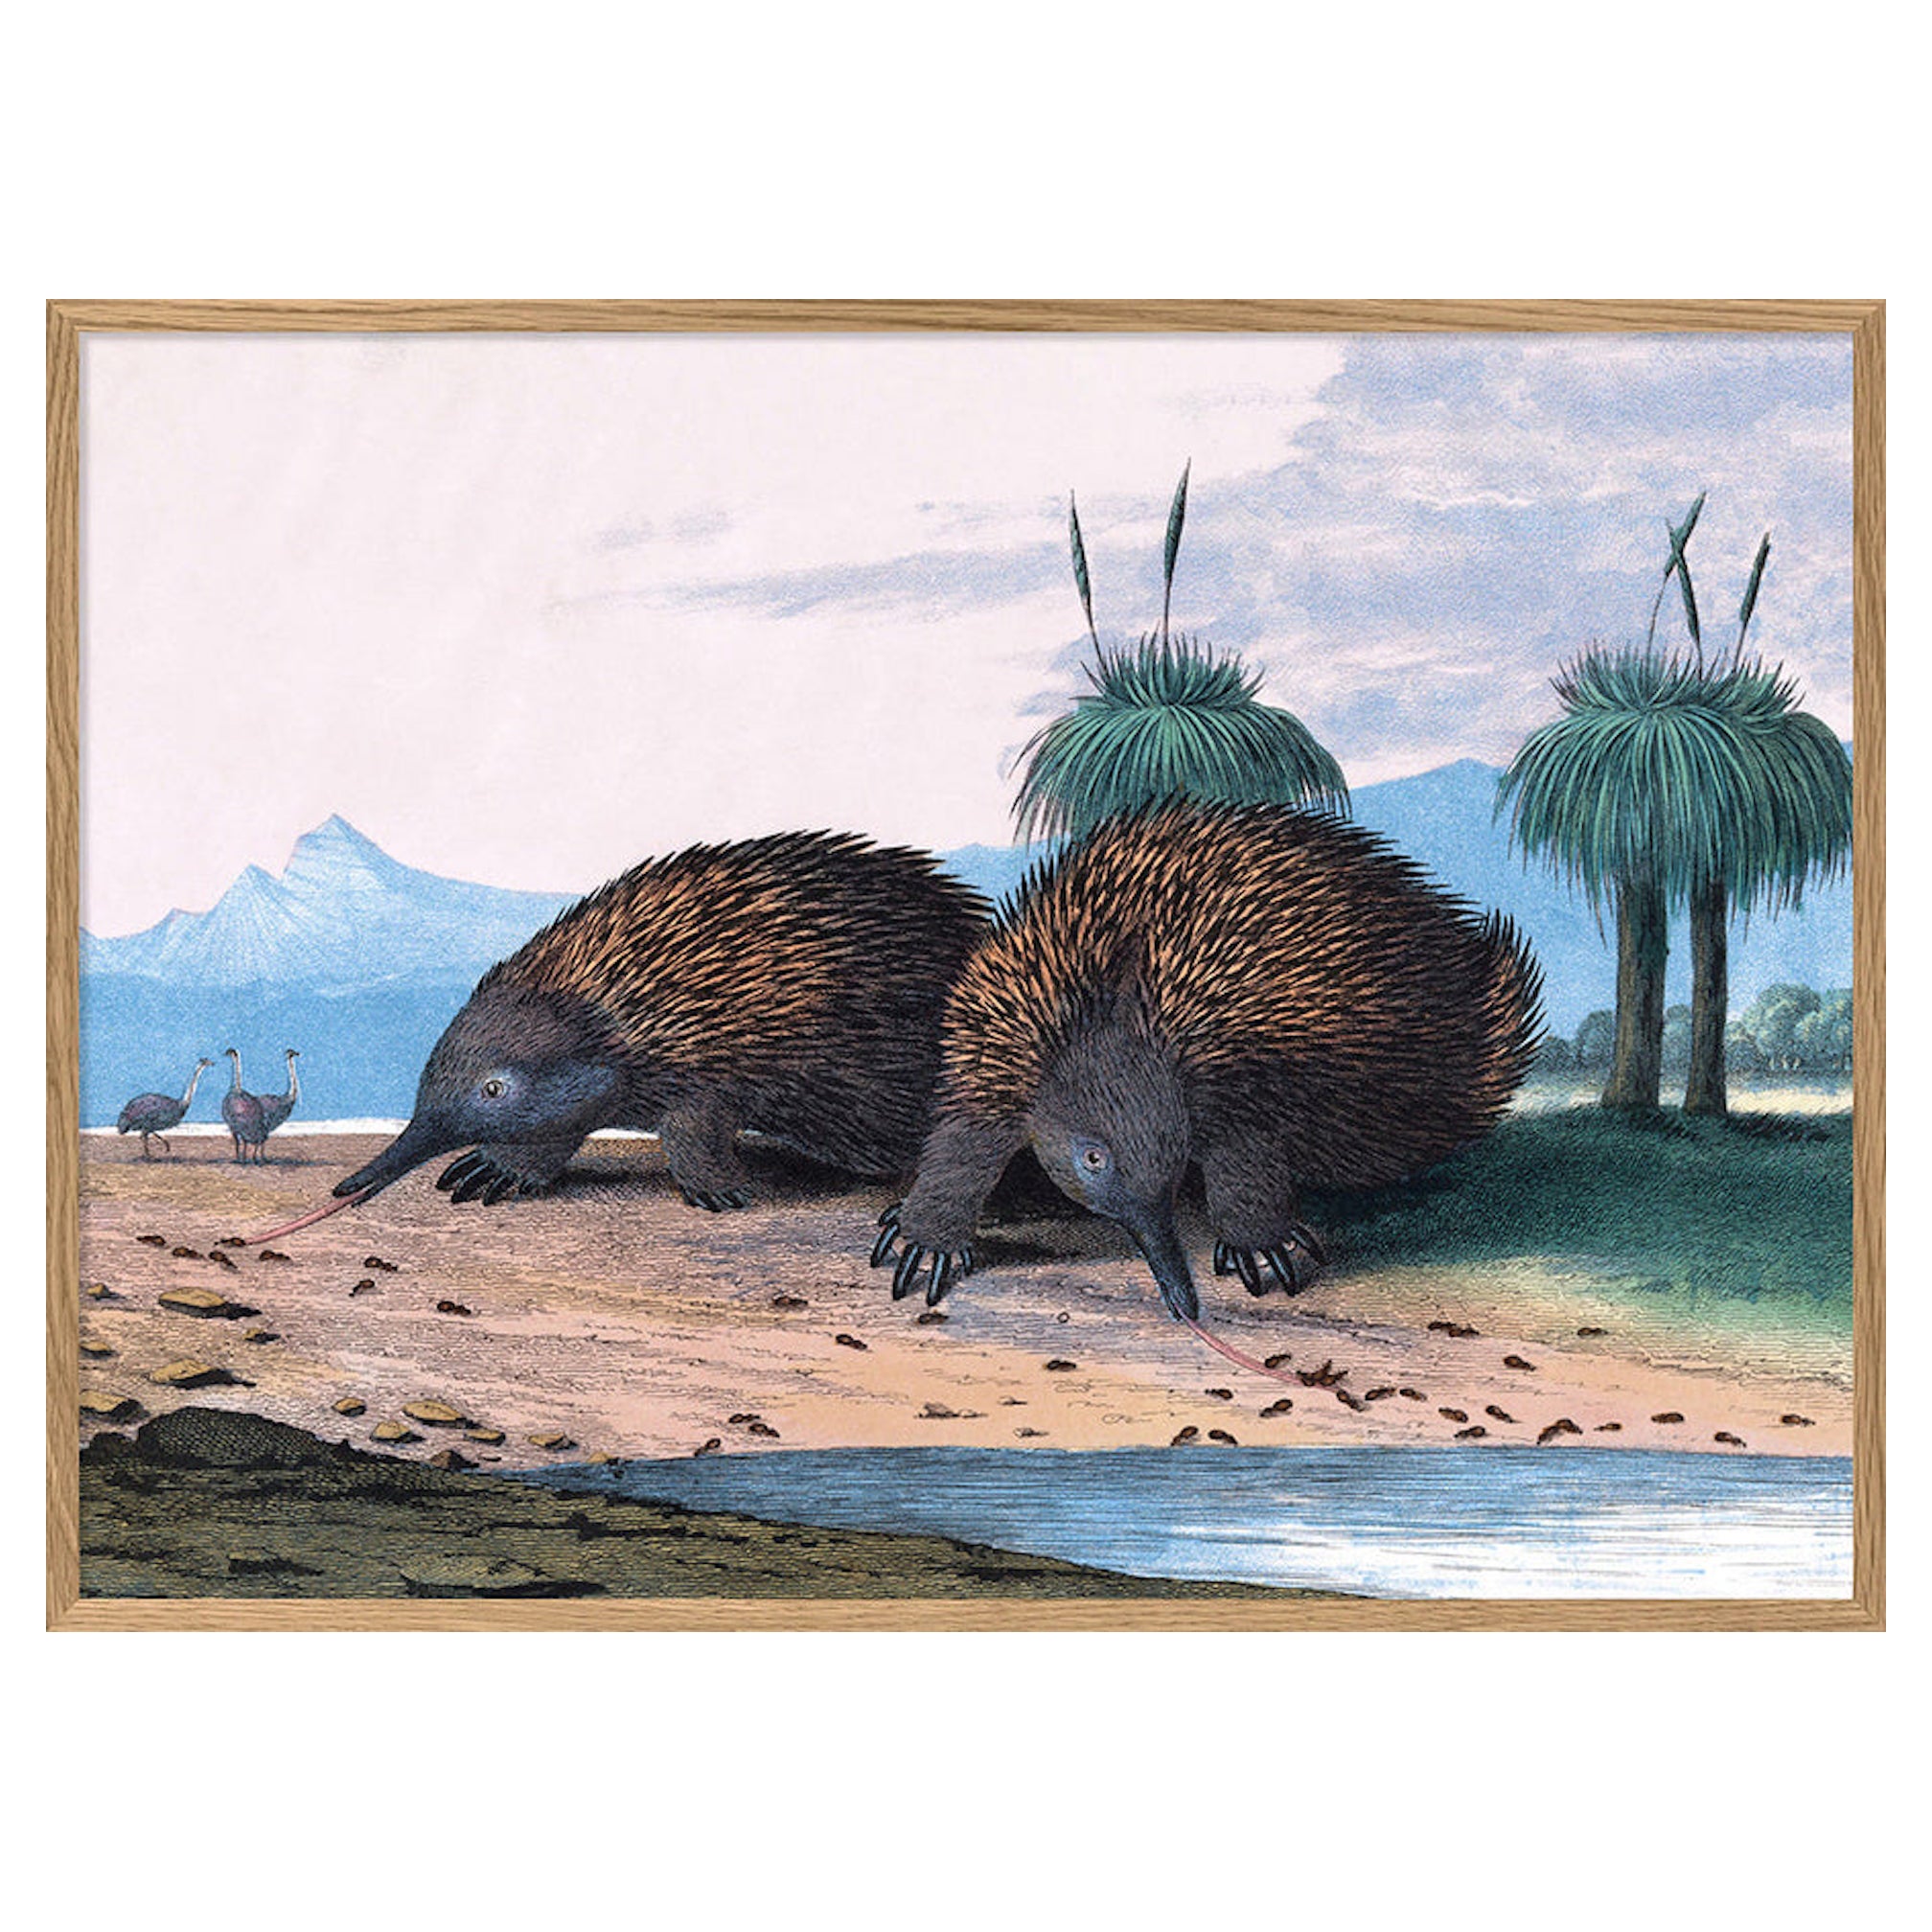 Beautiful Framed Drawing Print of "The Echidna"